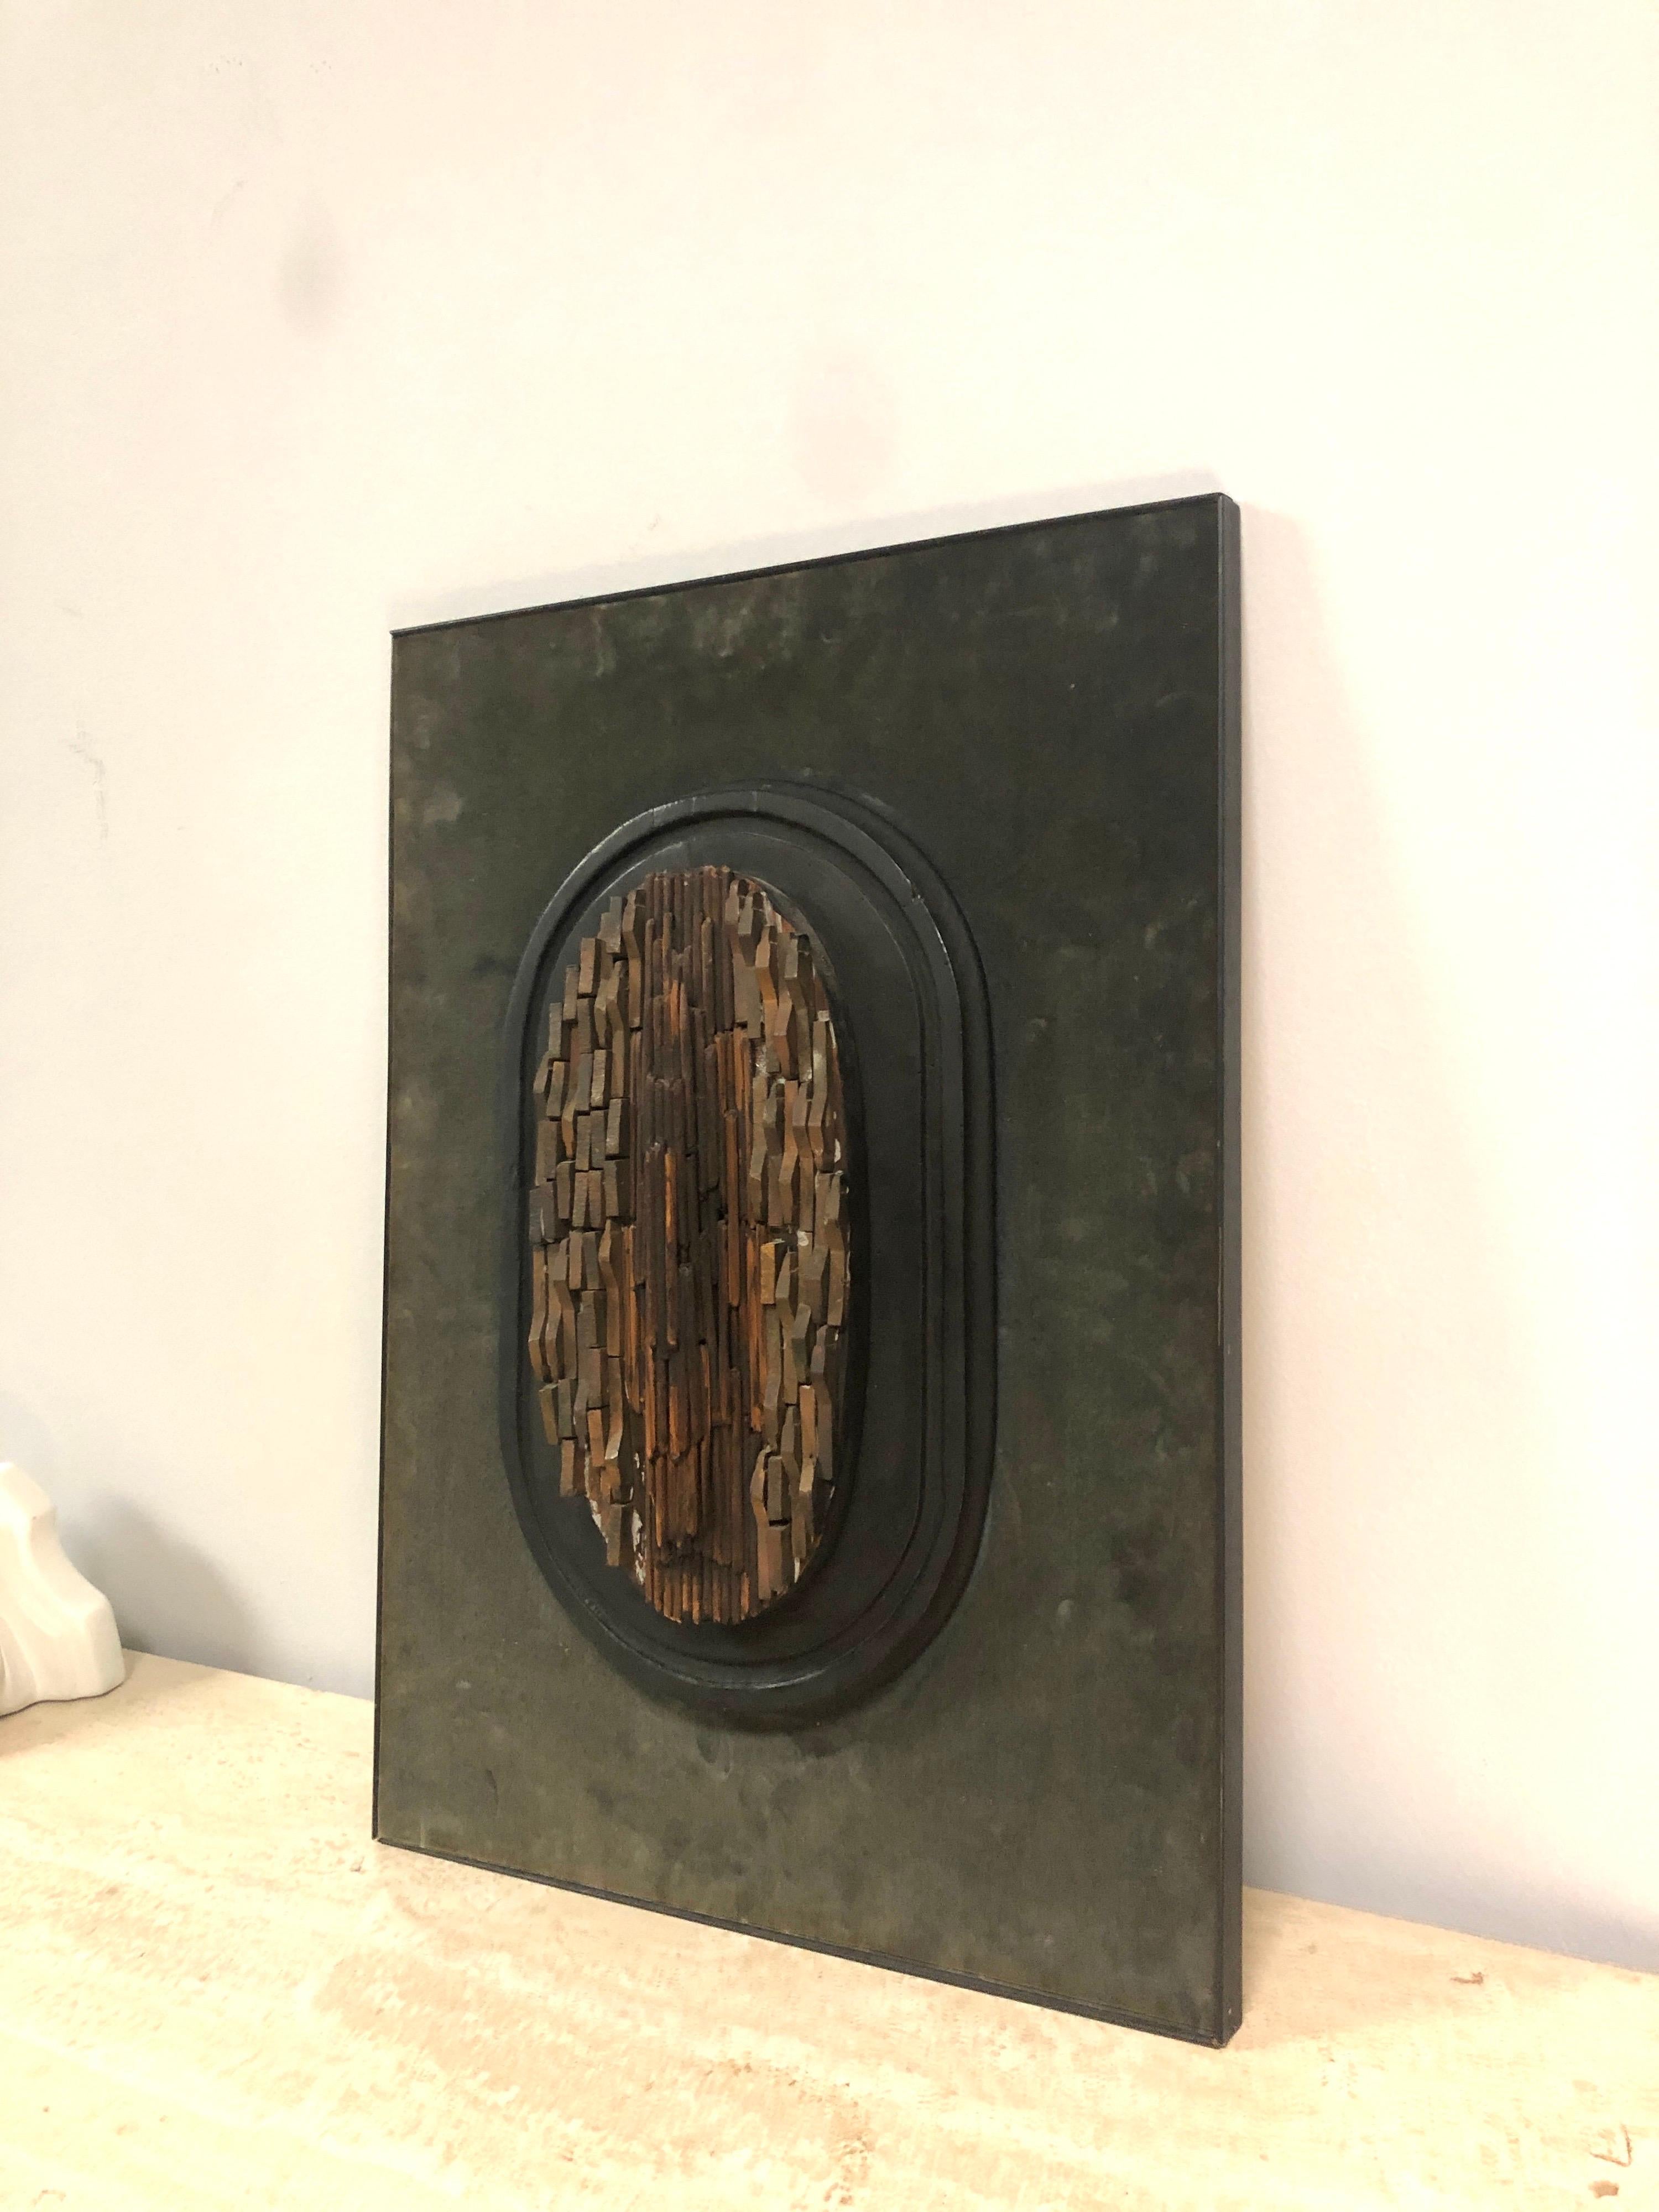 A wall sculpture by well known Belgian artist Vic Gentils. It is wood, metal, and ceramic pieces arranged on a wood oval, which is mounted on a velvet covered board with makeshift frame. Quite interesting in a raw, organic intuitive way. Can't take